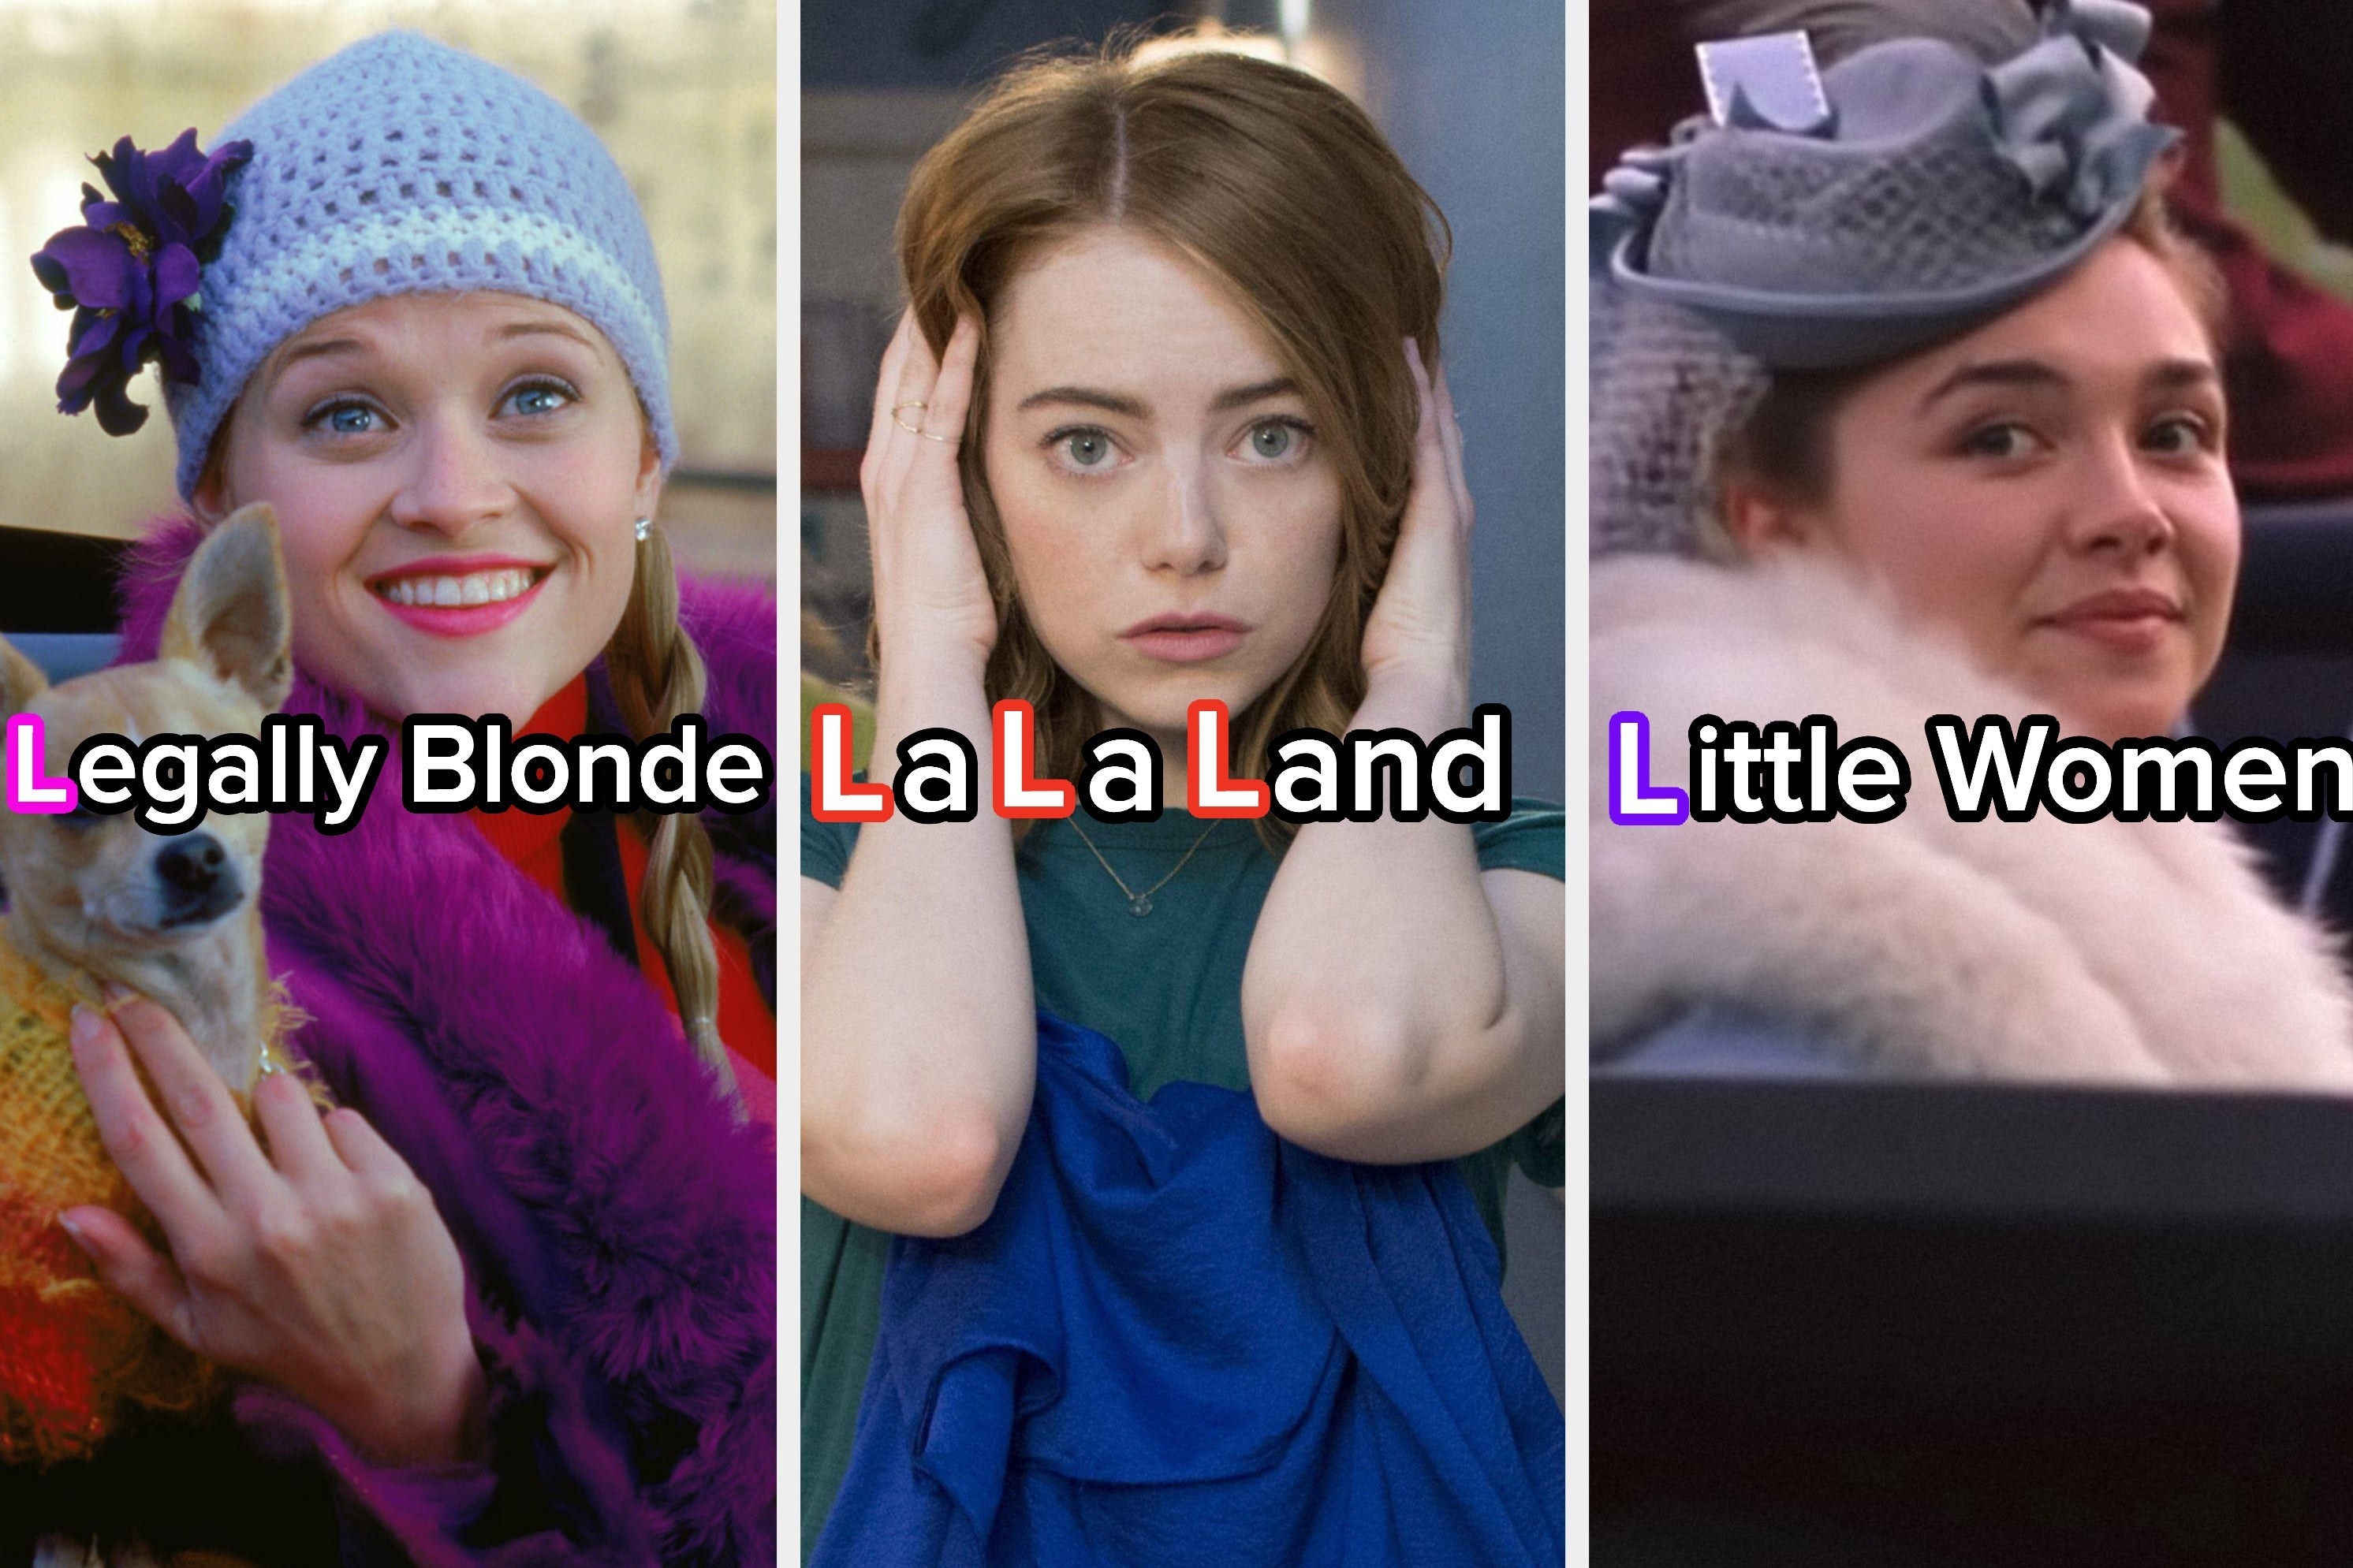 three images, on the left, Elle Woods in &quot;Legally Blonde,&quot; in the middle is Mia from &quot;La La Land,&quot; and on the right is Amy from &quot;Little Women (2019.&quot; Each title is written over its related screencap